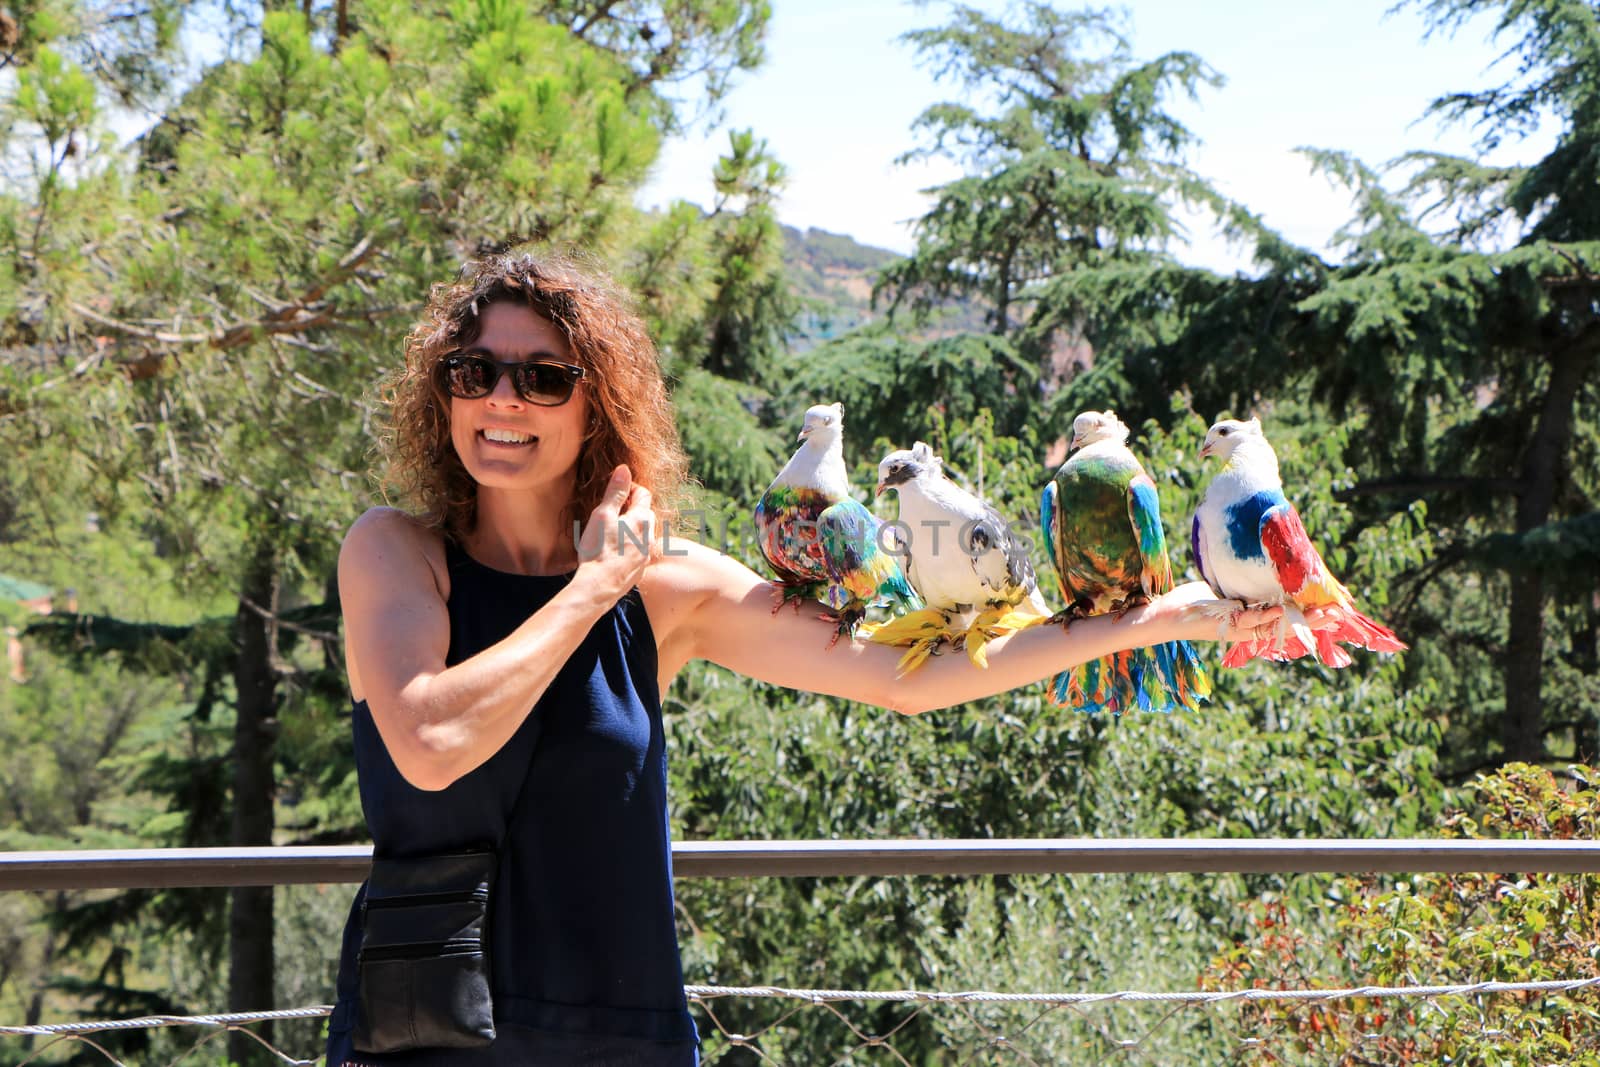 Amazingly beautiful birds in the Park Guell on the beautiful young girl.